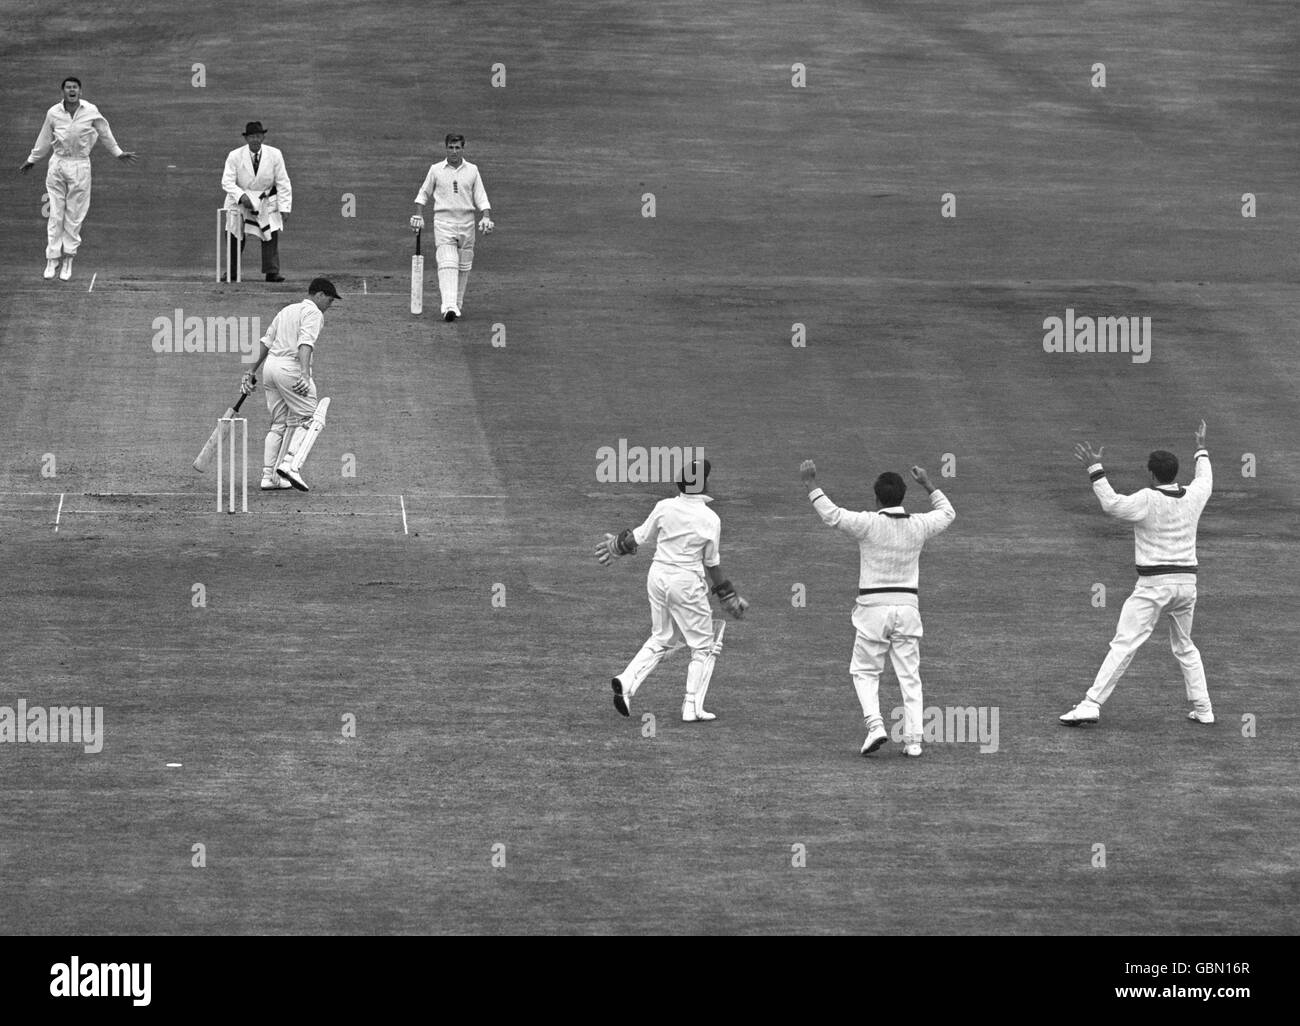 Cricket - Third Test Match - England v Australia - Headingley - Day One. England batsman Ken Taylor is caught out by wicket keeper Wally Grout off Neil Hawke for 9 runs. Stock Photo